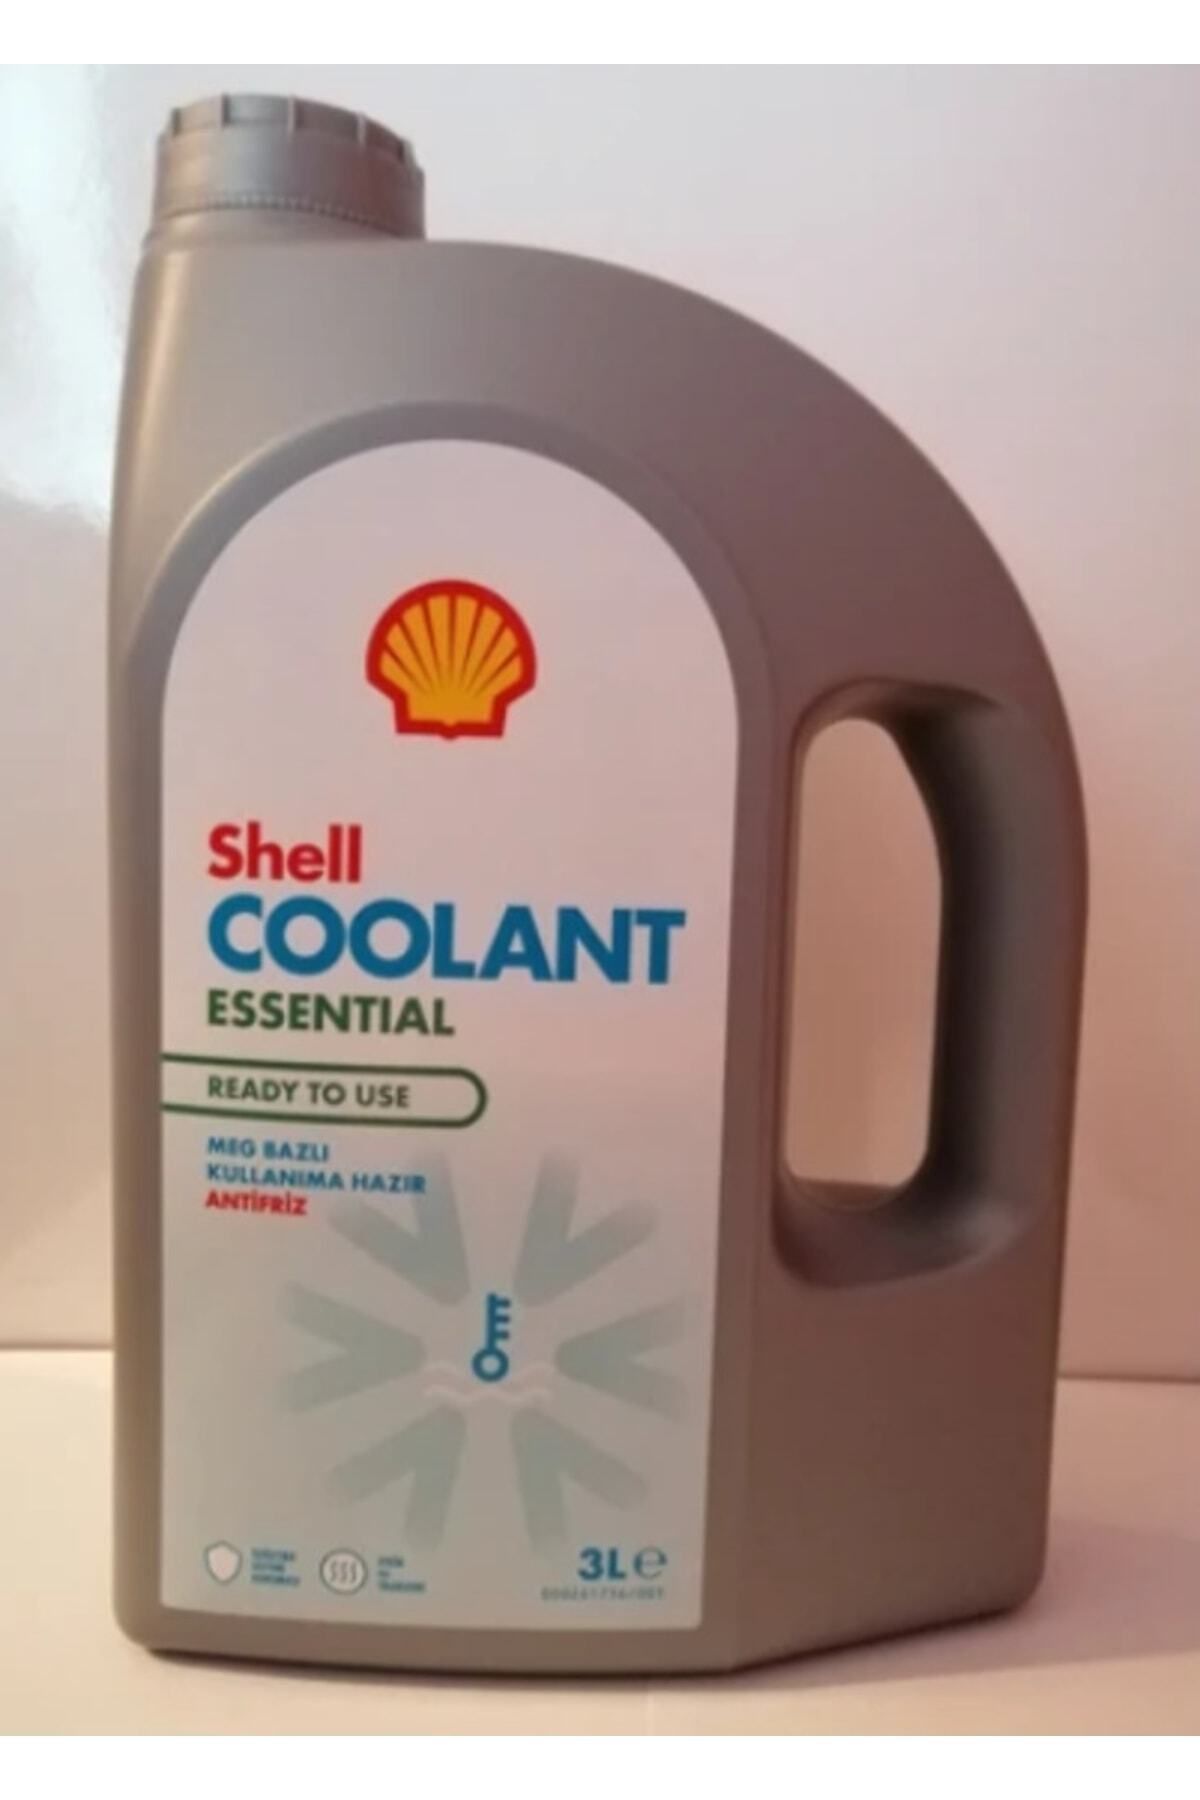 Shell Coolant Essential Ready To Use Antifriz 3lt